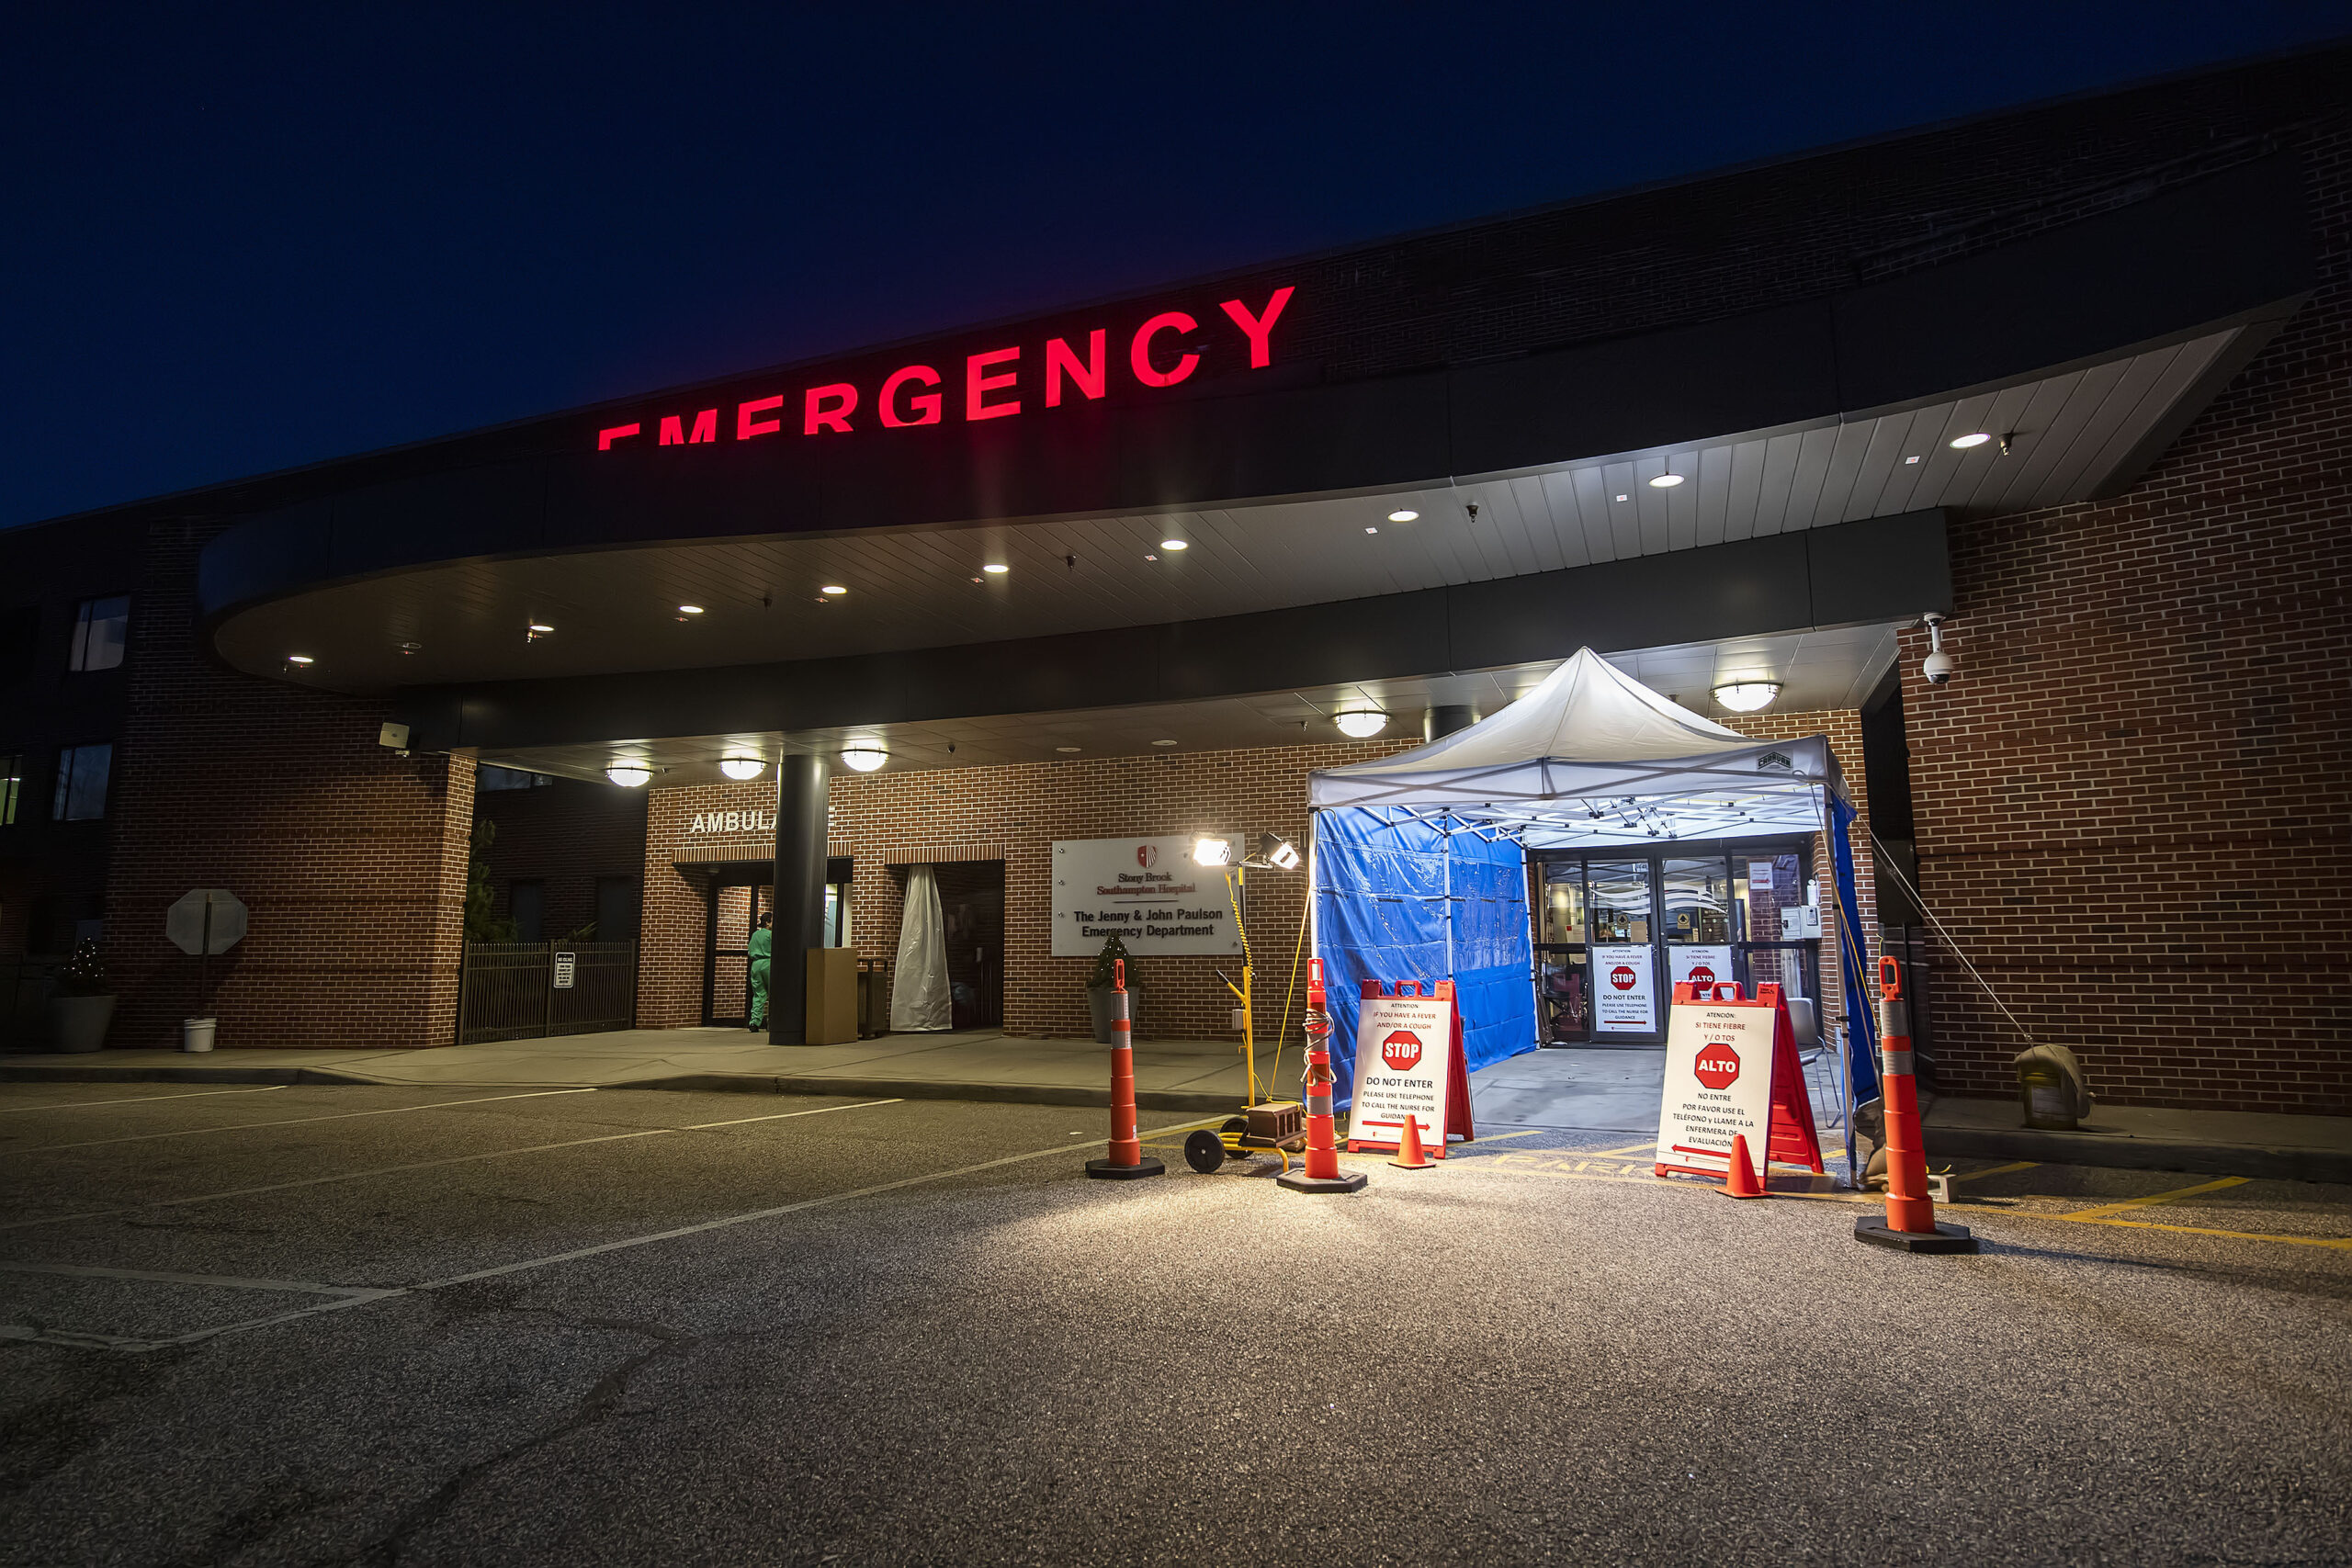 The exterior entrance of the Southampton Hospital Emergency Department as prepared for the COVID-19 pandemic, photographed on March 13, 2020. MICHAEL HELLER